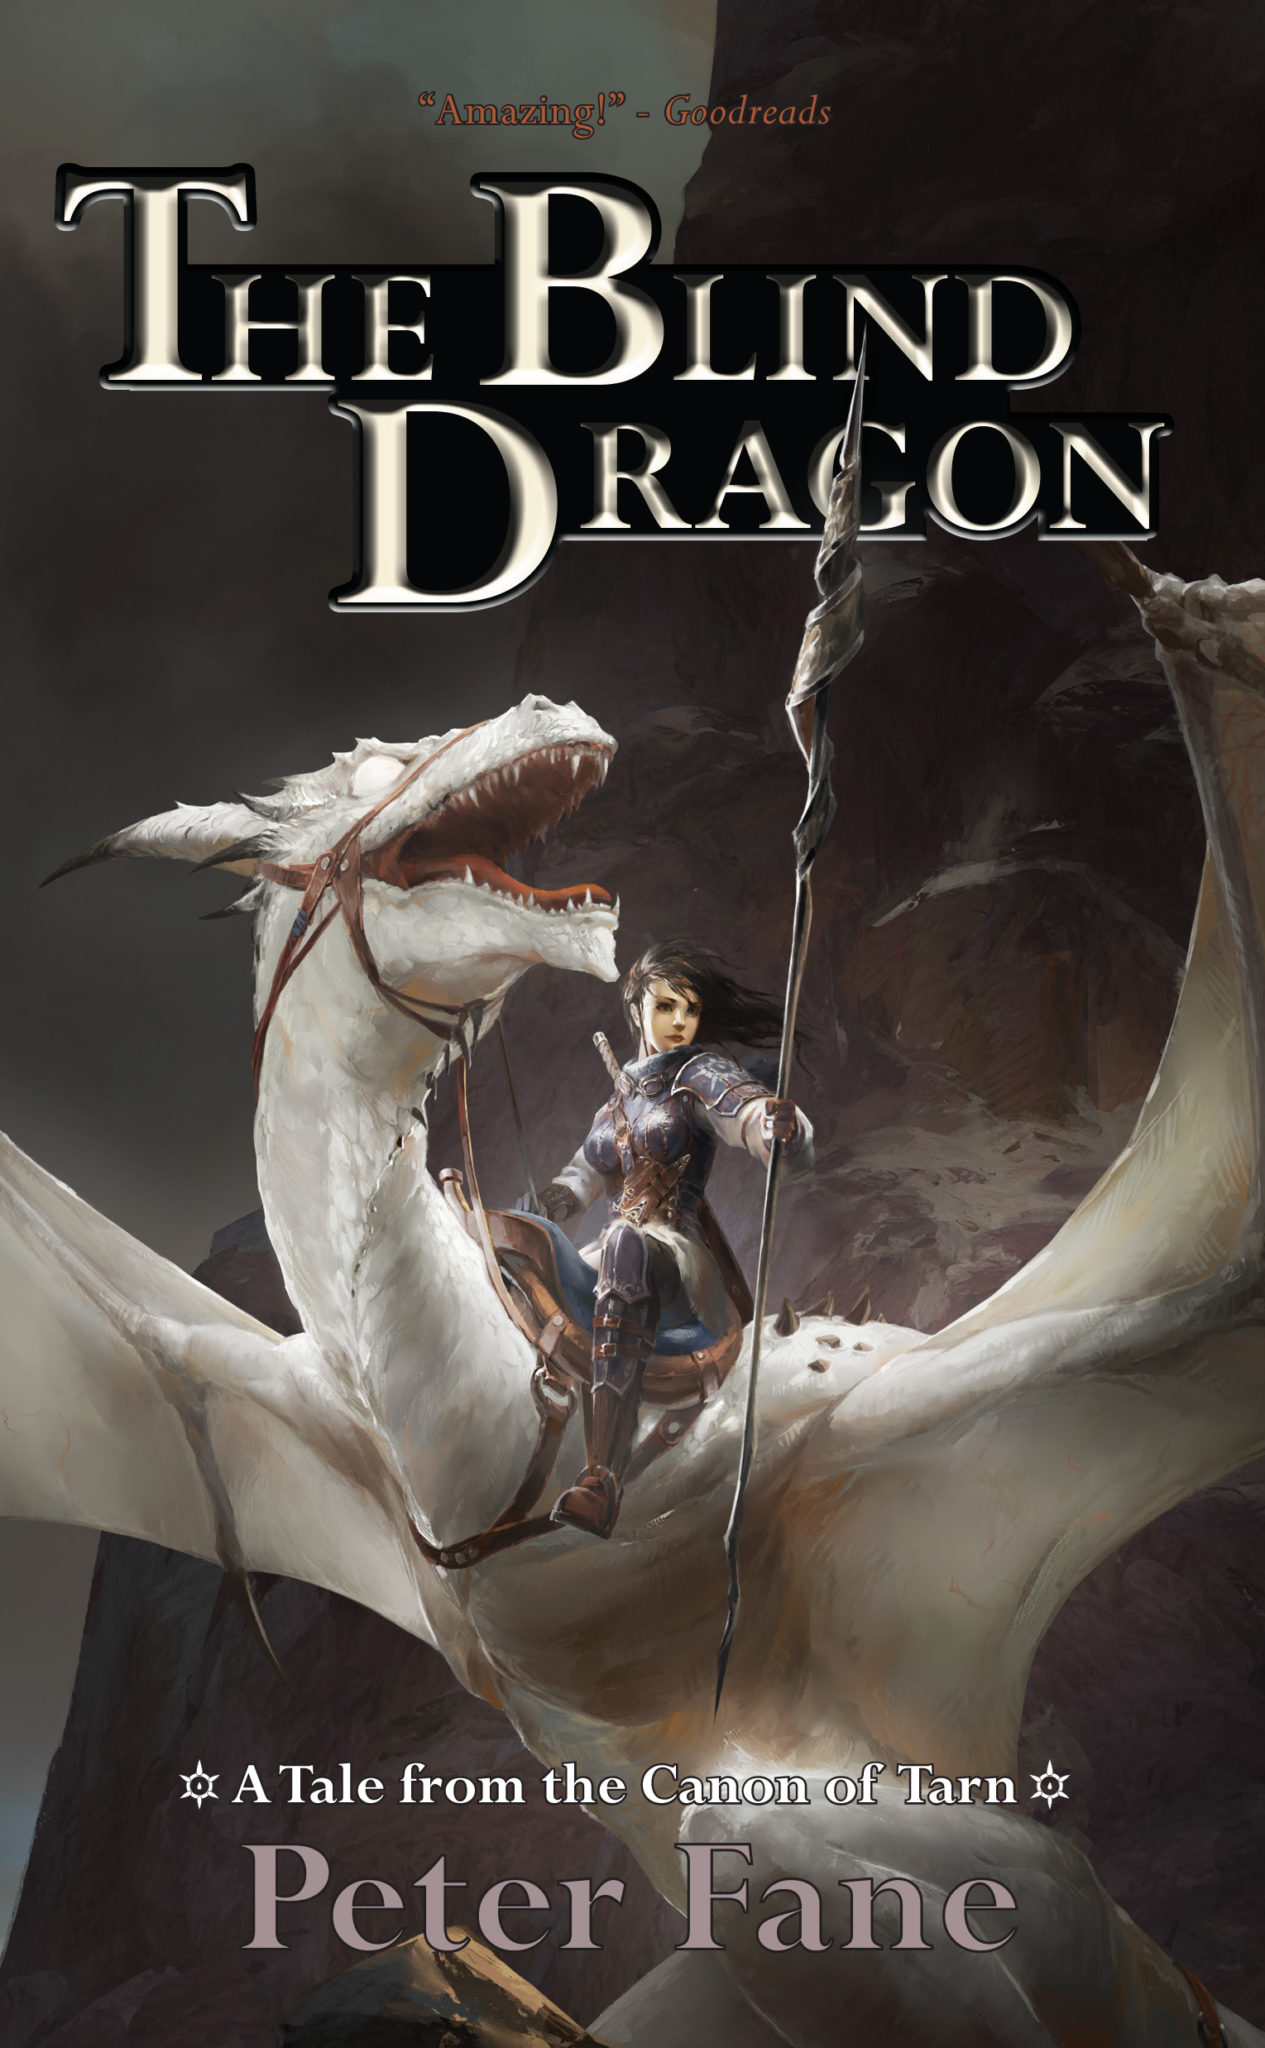 FREE: The Blind Dragon: A Tale from the Canon of Tarn by Peter Fane